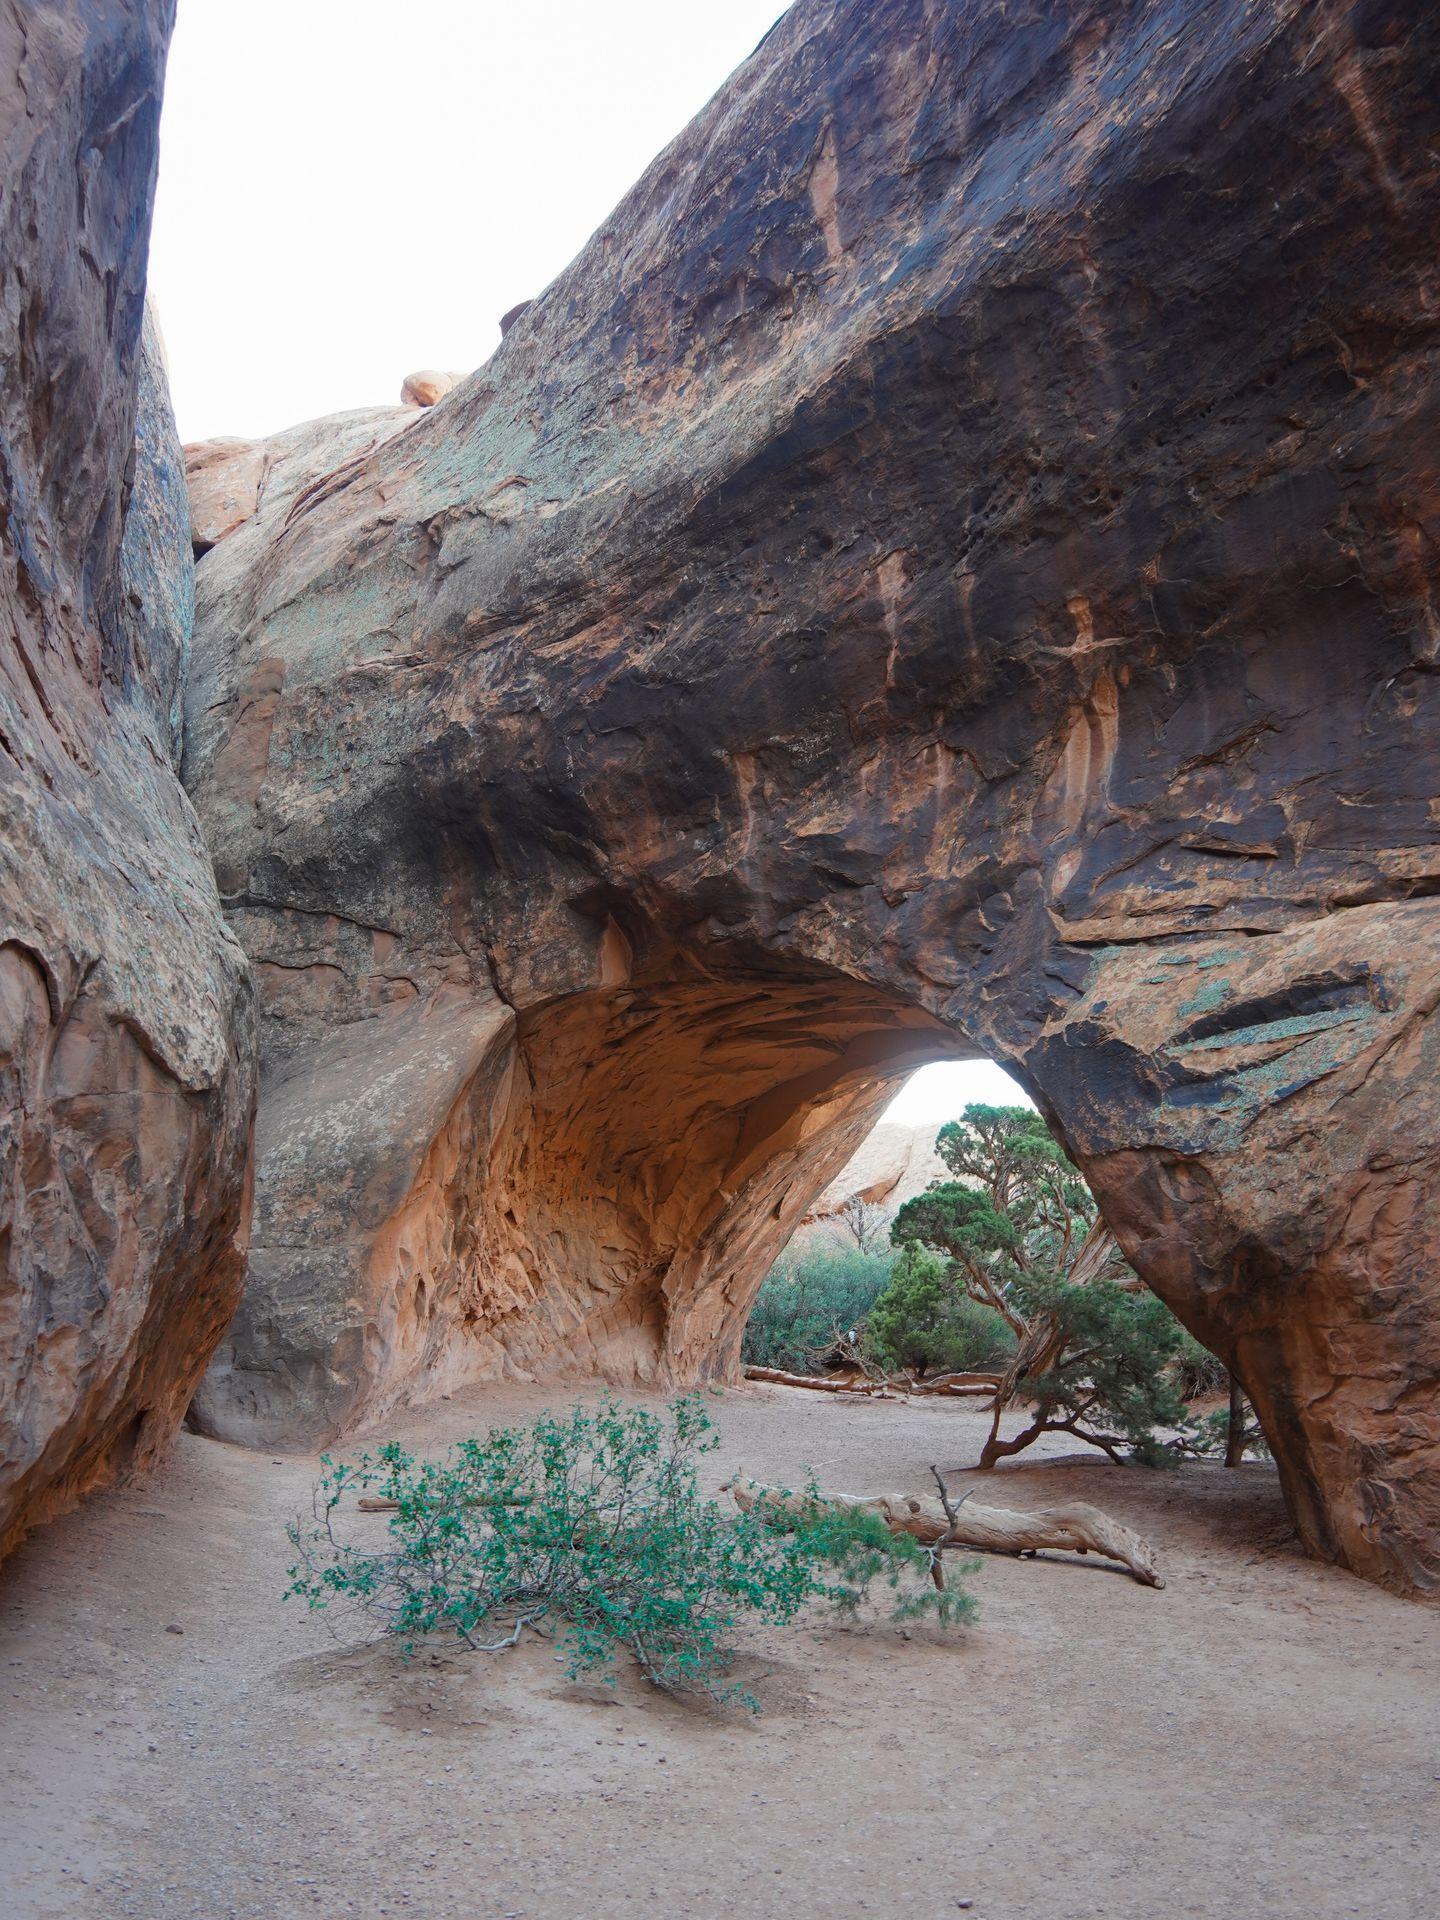 An arch with dark brown coloring and a sandy floor along the Devil's Garden trail in Arches National Park.